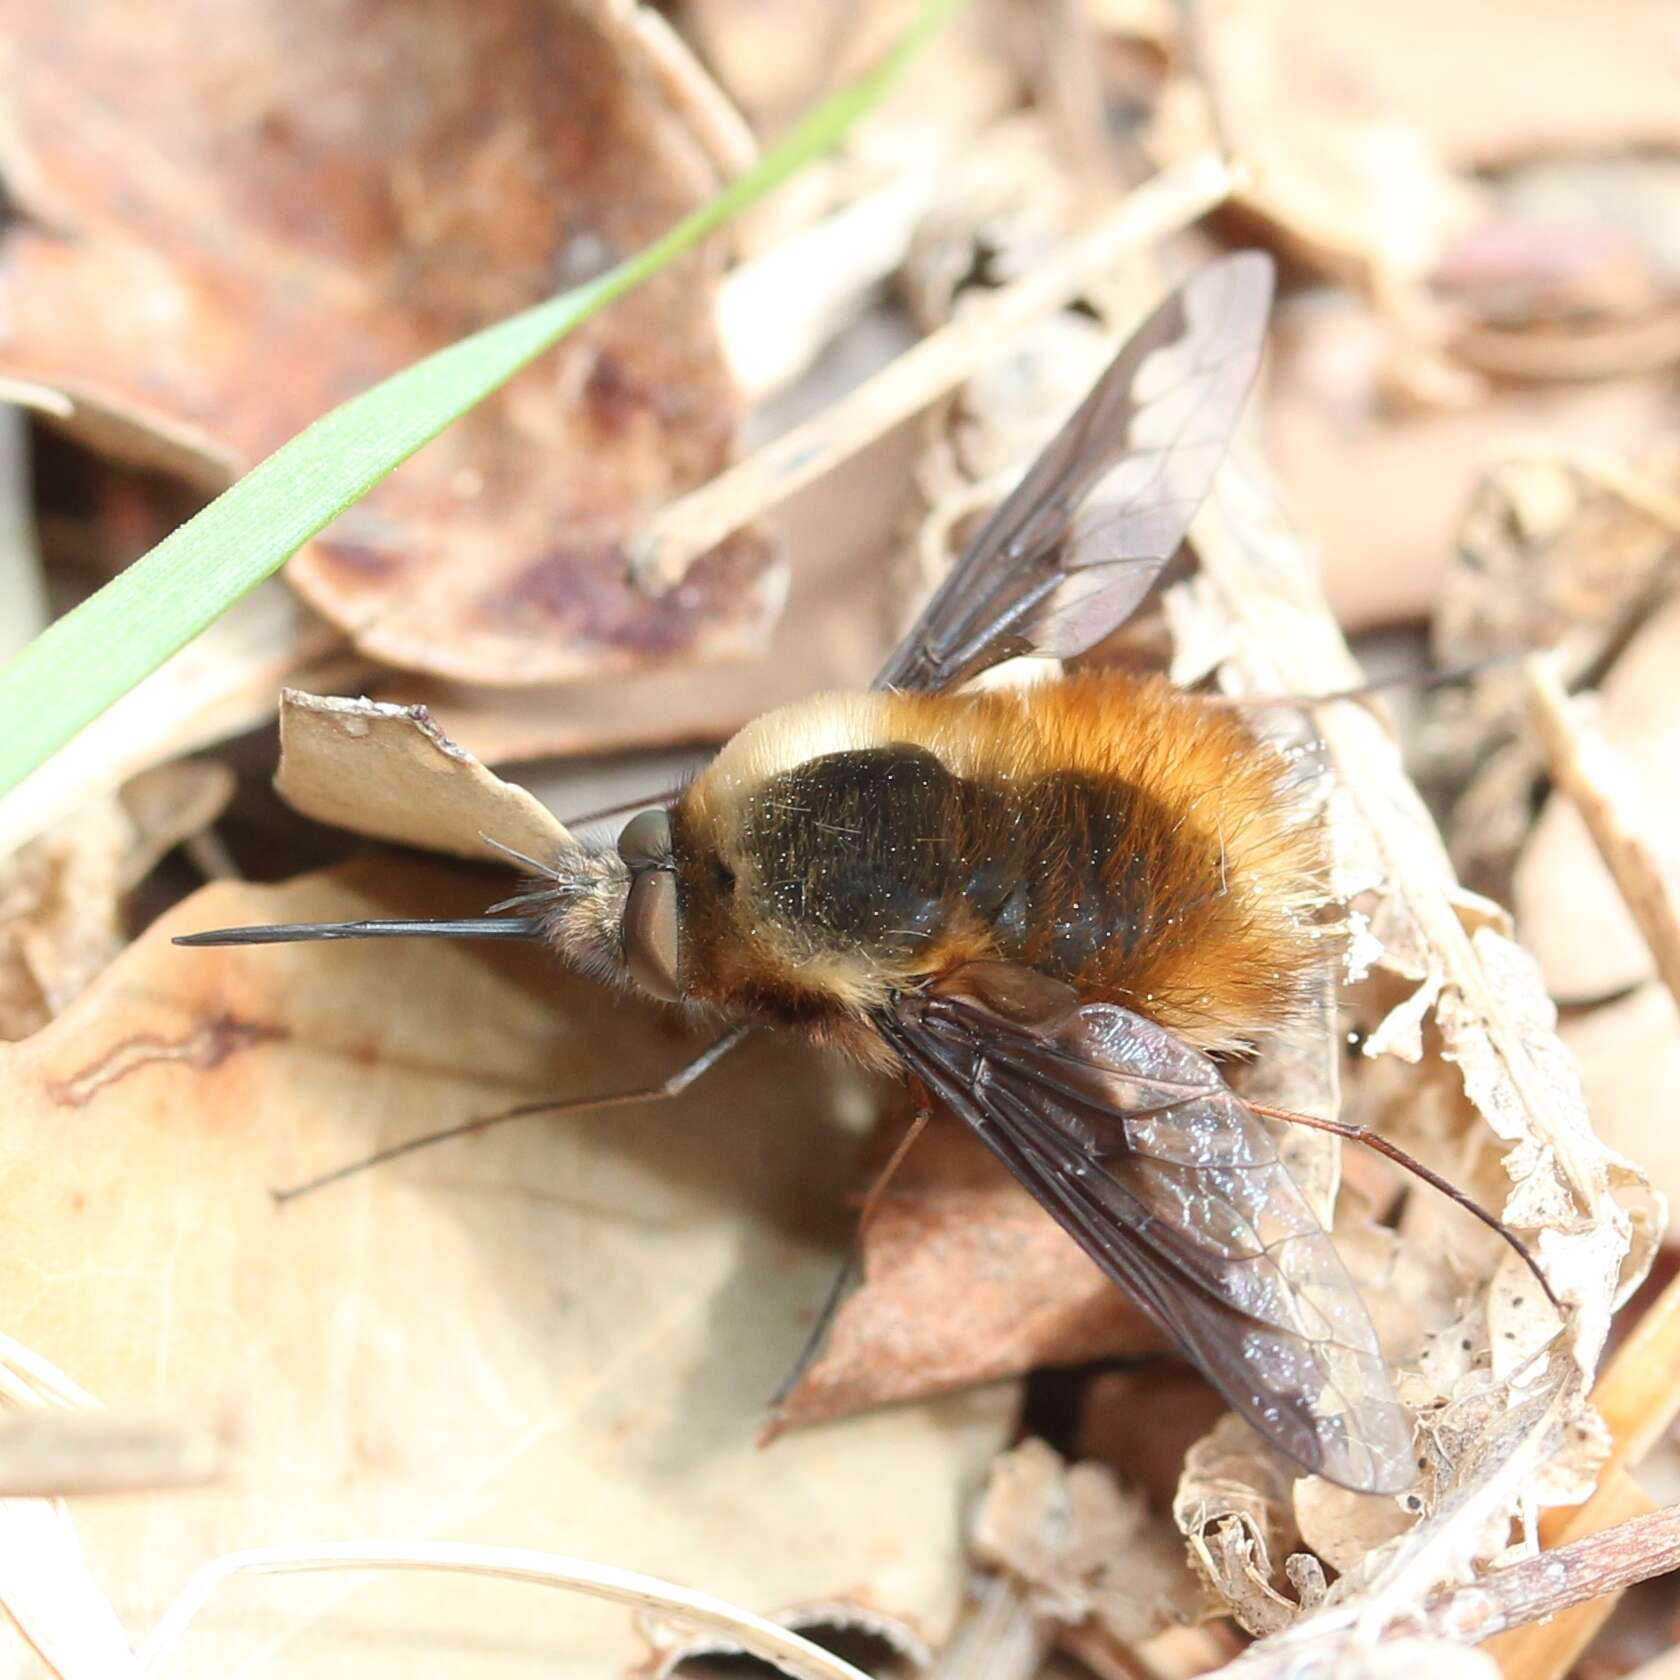 Image of Large bee-fly